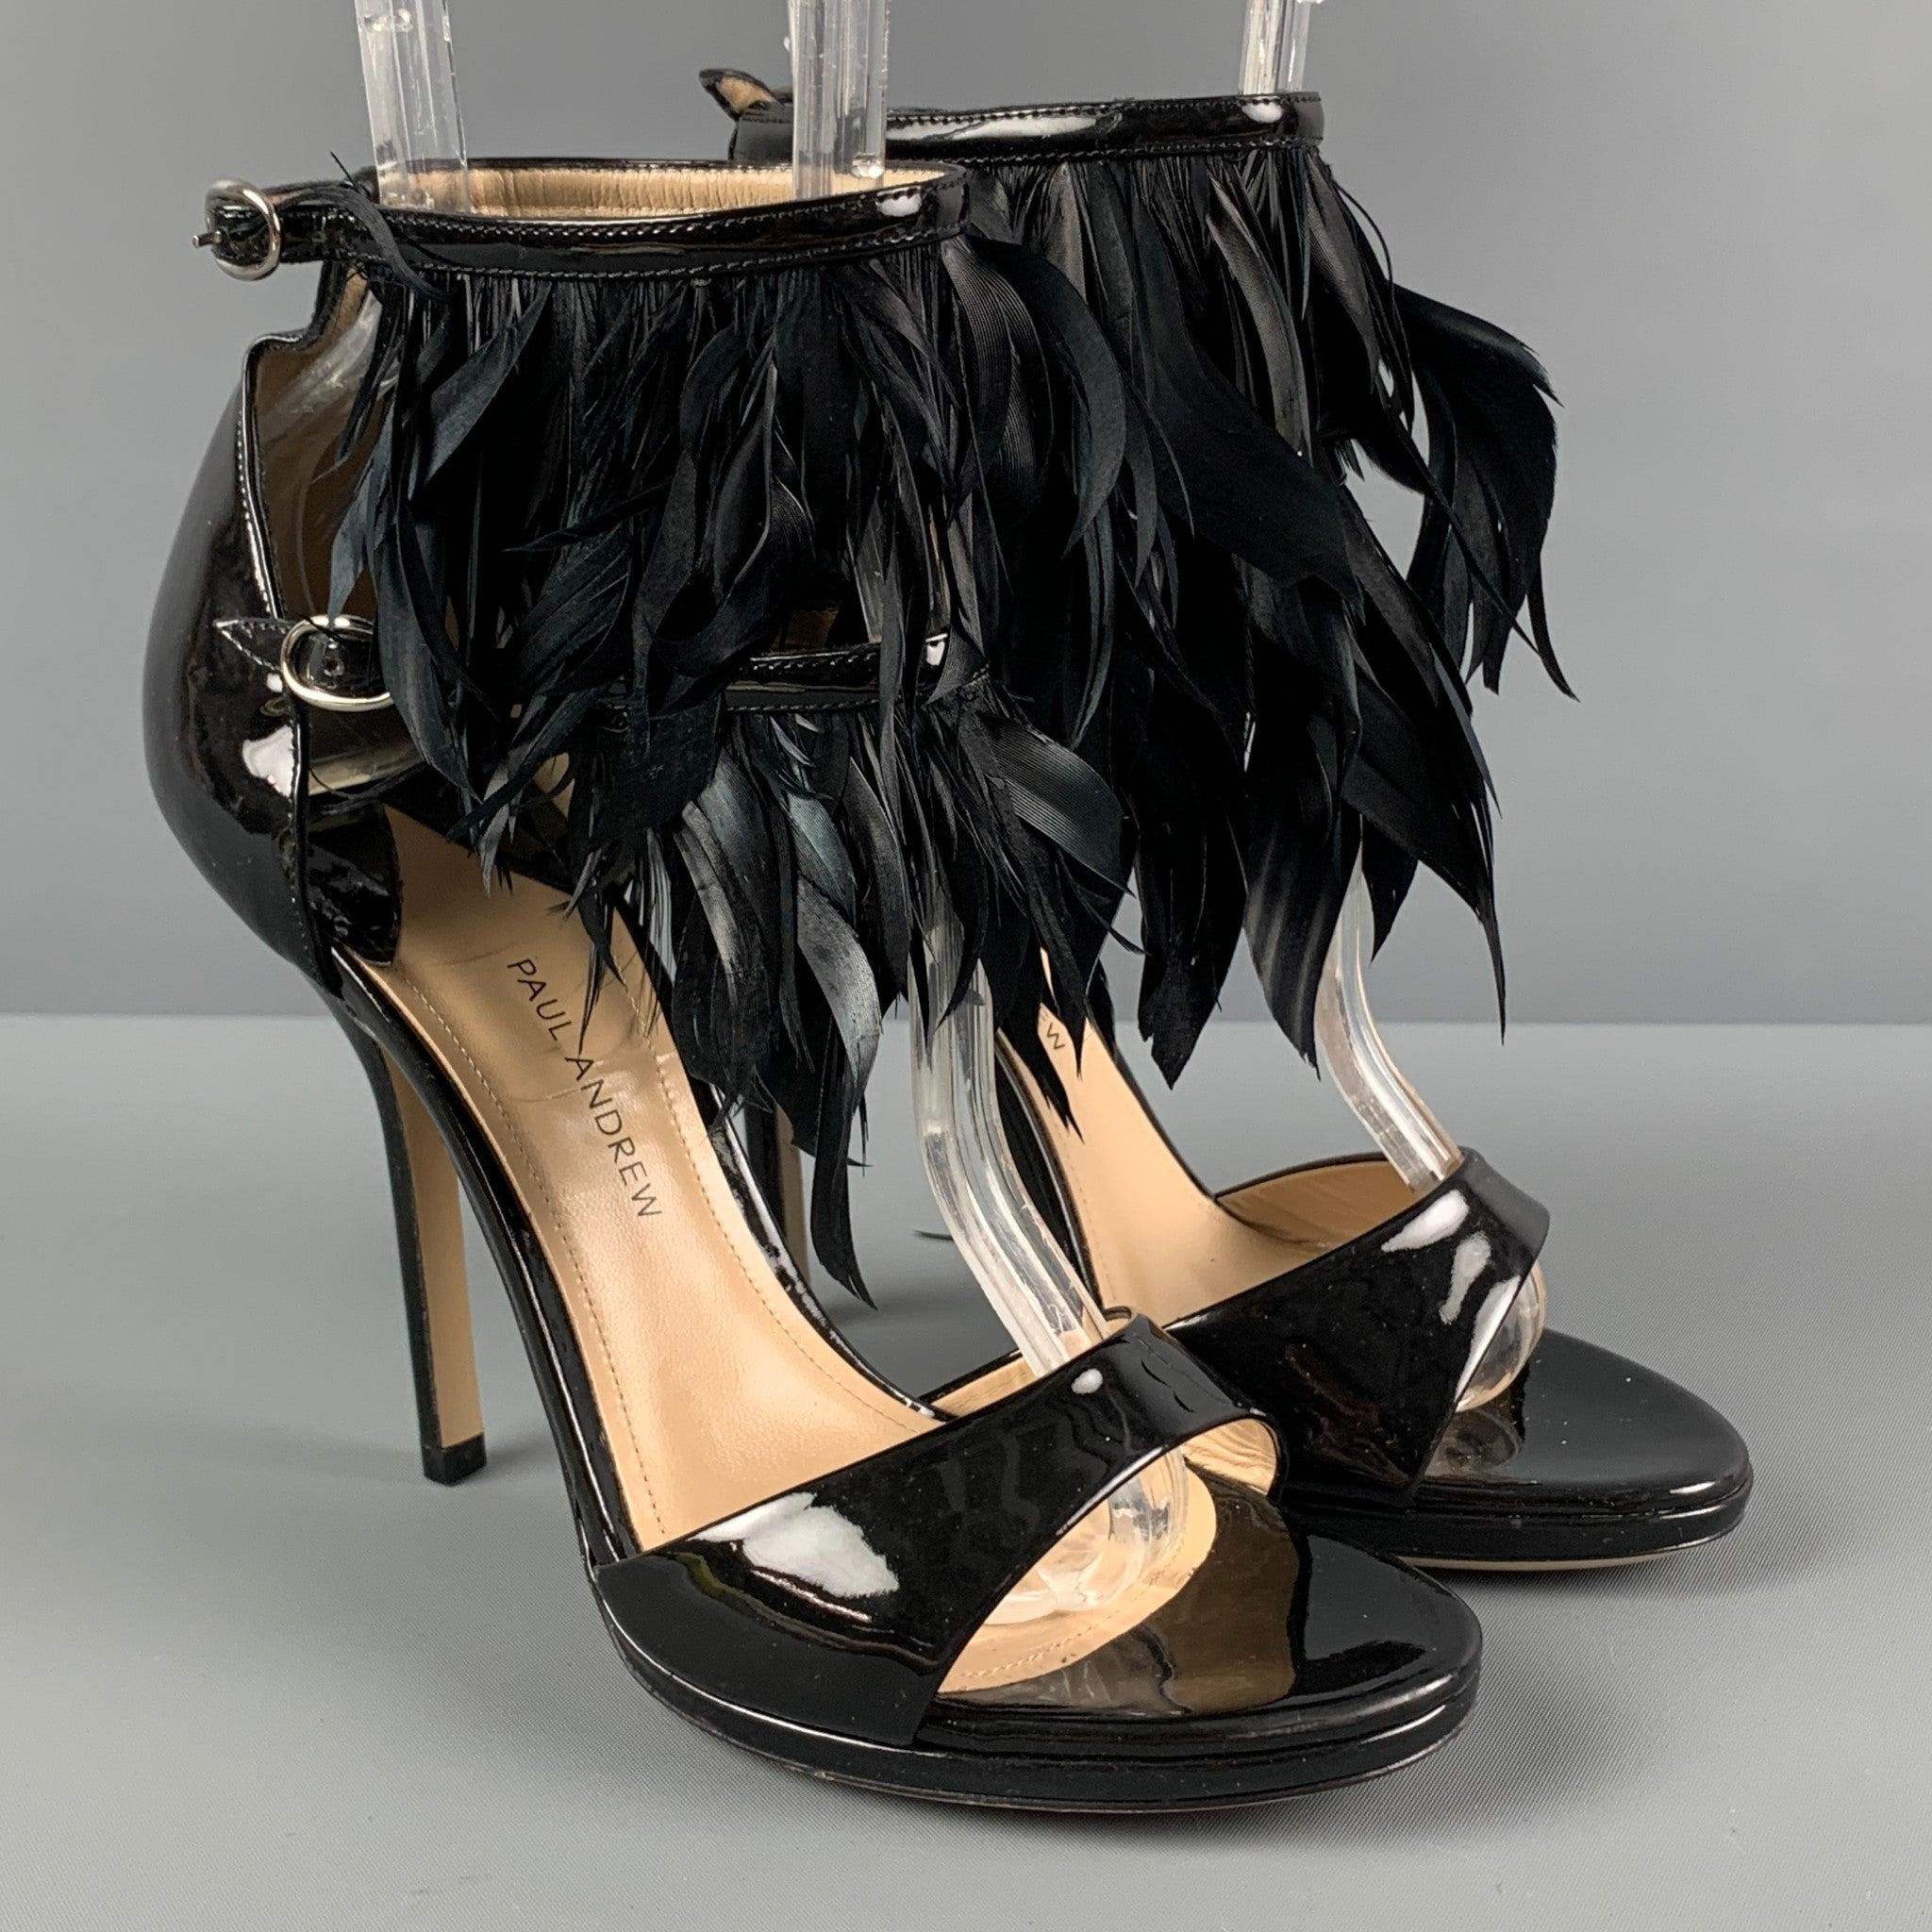 PAUL ANDREW sandals comes in a black patent leather featuring a double feather strap design, open toe, and a stiletto heel. Made in Italy.
New Without Tags.  

Marked:   36 

Measurements: 
  Heel: 4.5 inches  
  
  
 
Reference: 120965
Category: